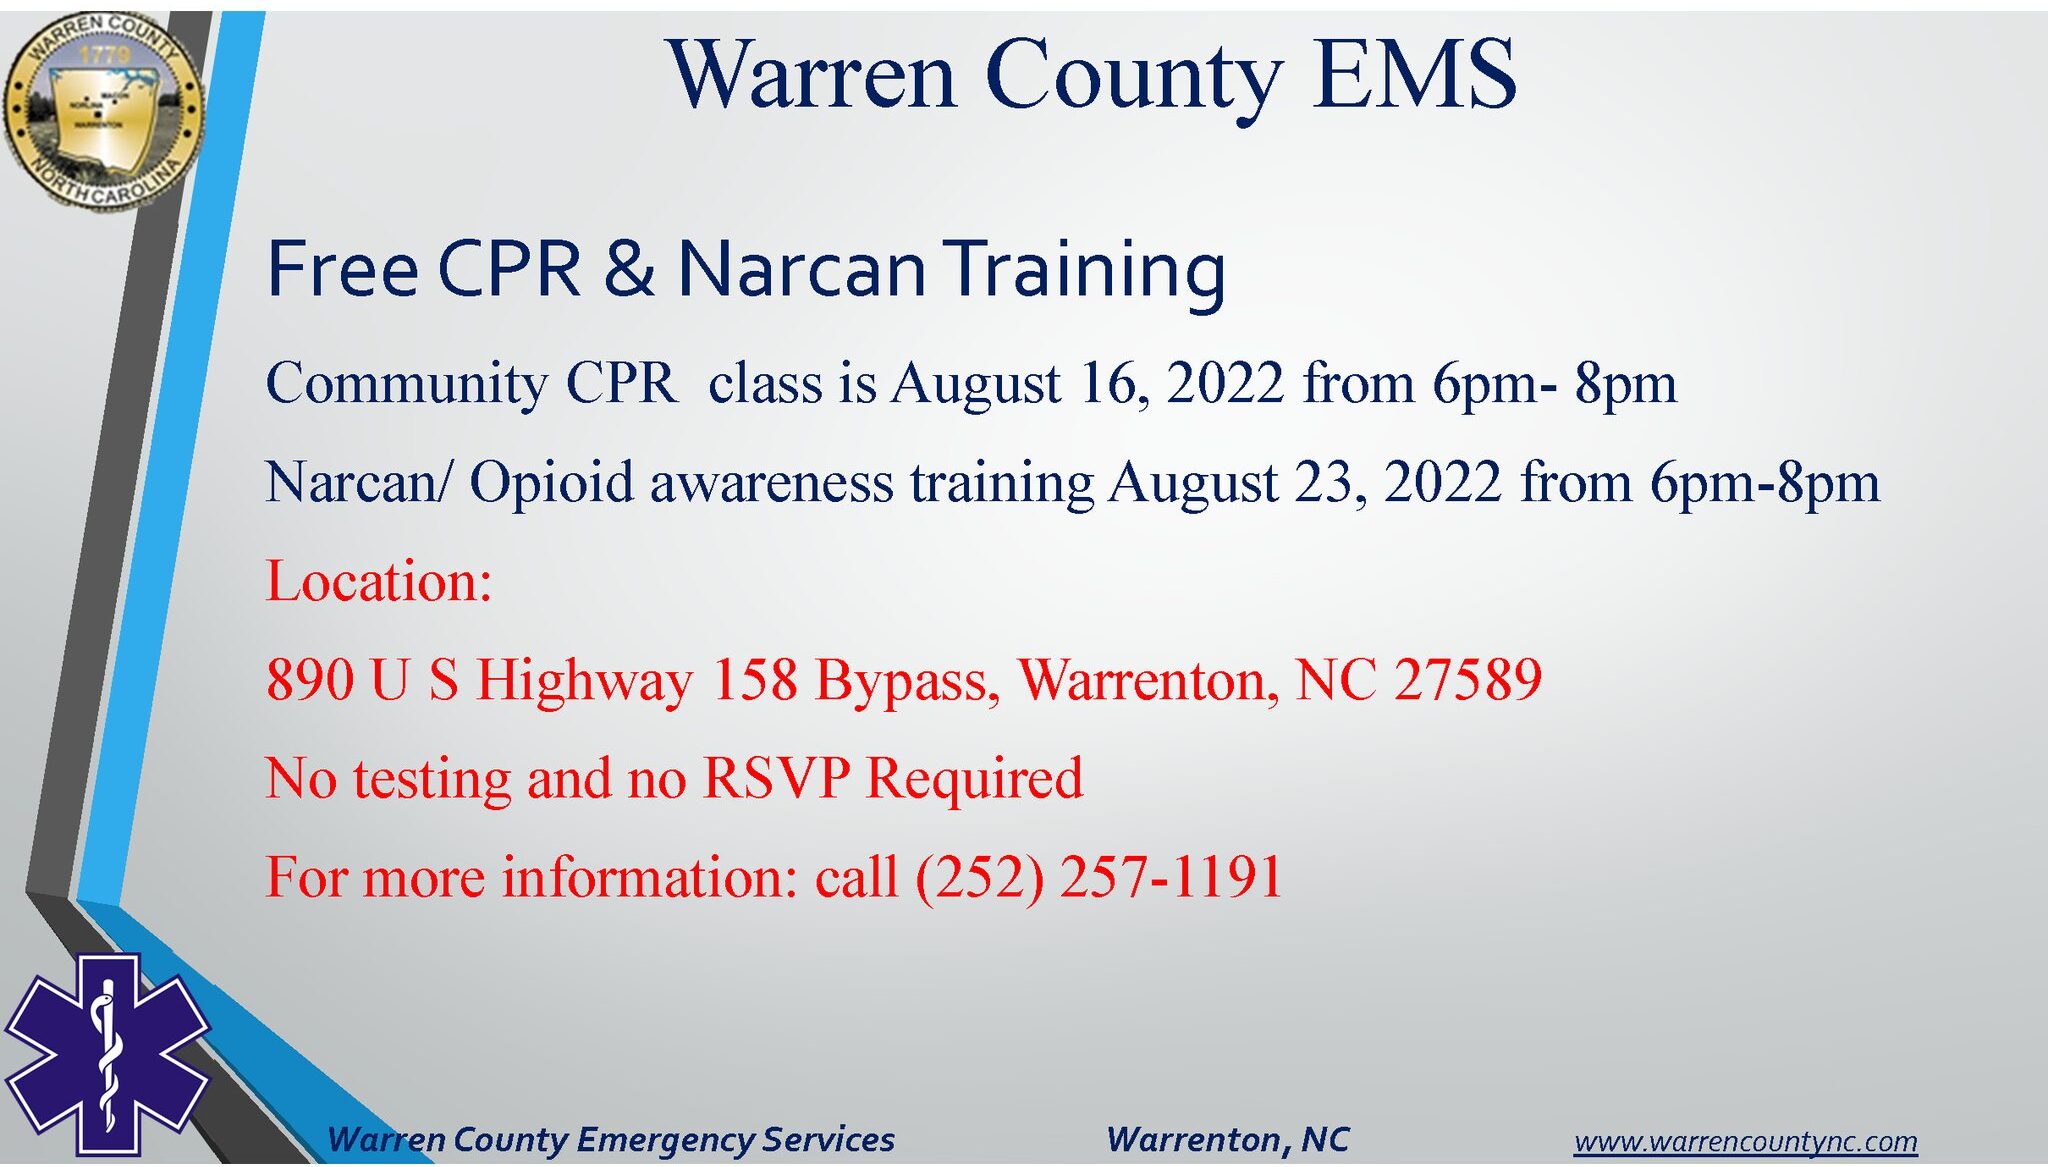 warren county ems free cpr narcan training august 16 2022